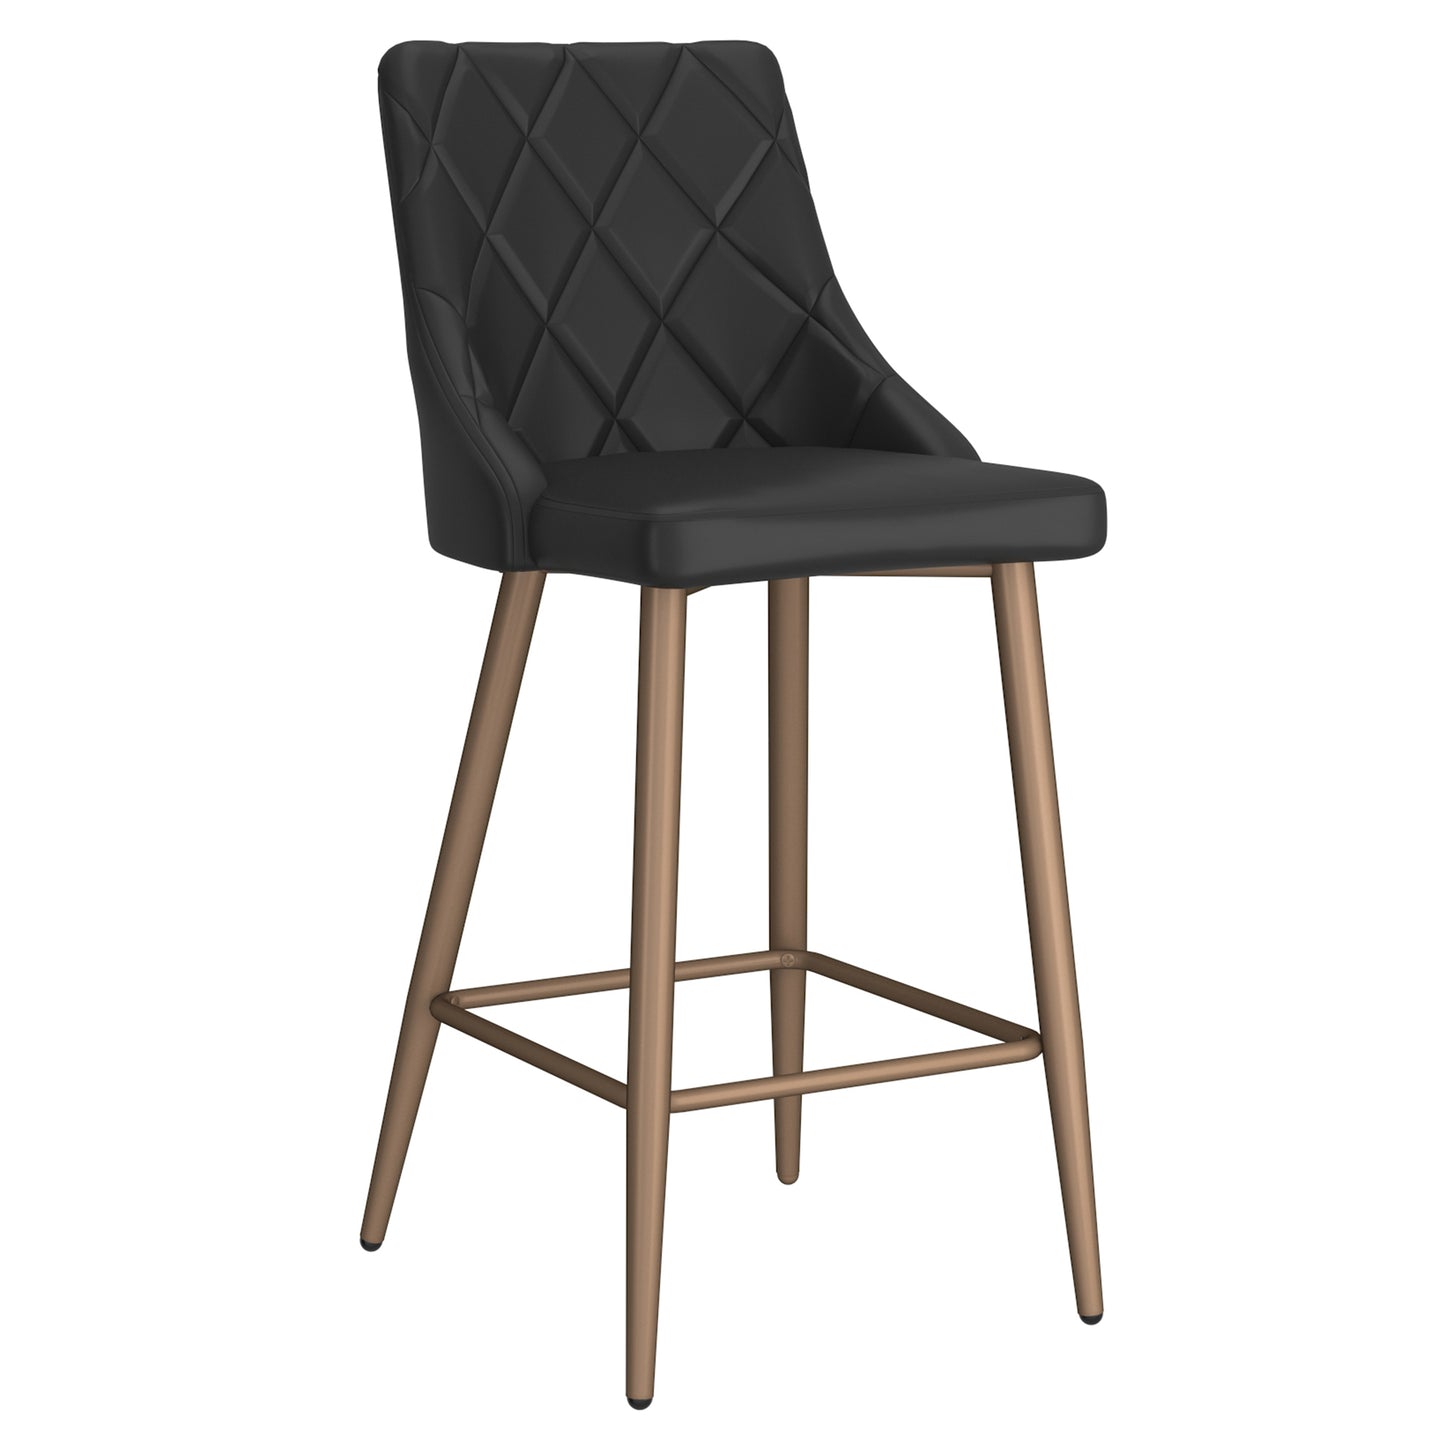 (ANTOINE BLACK- 2 PACK) - LEATHER COUNTER STOOLS